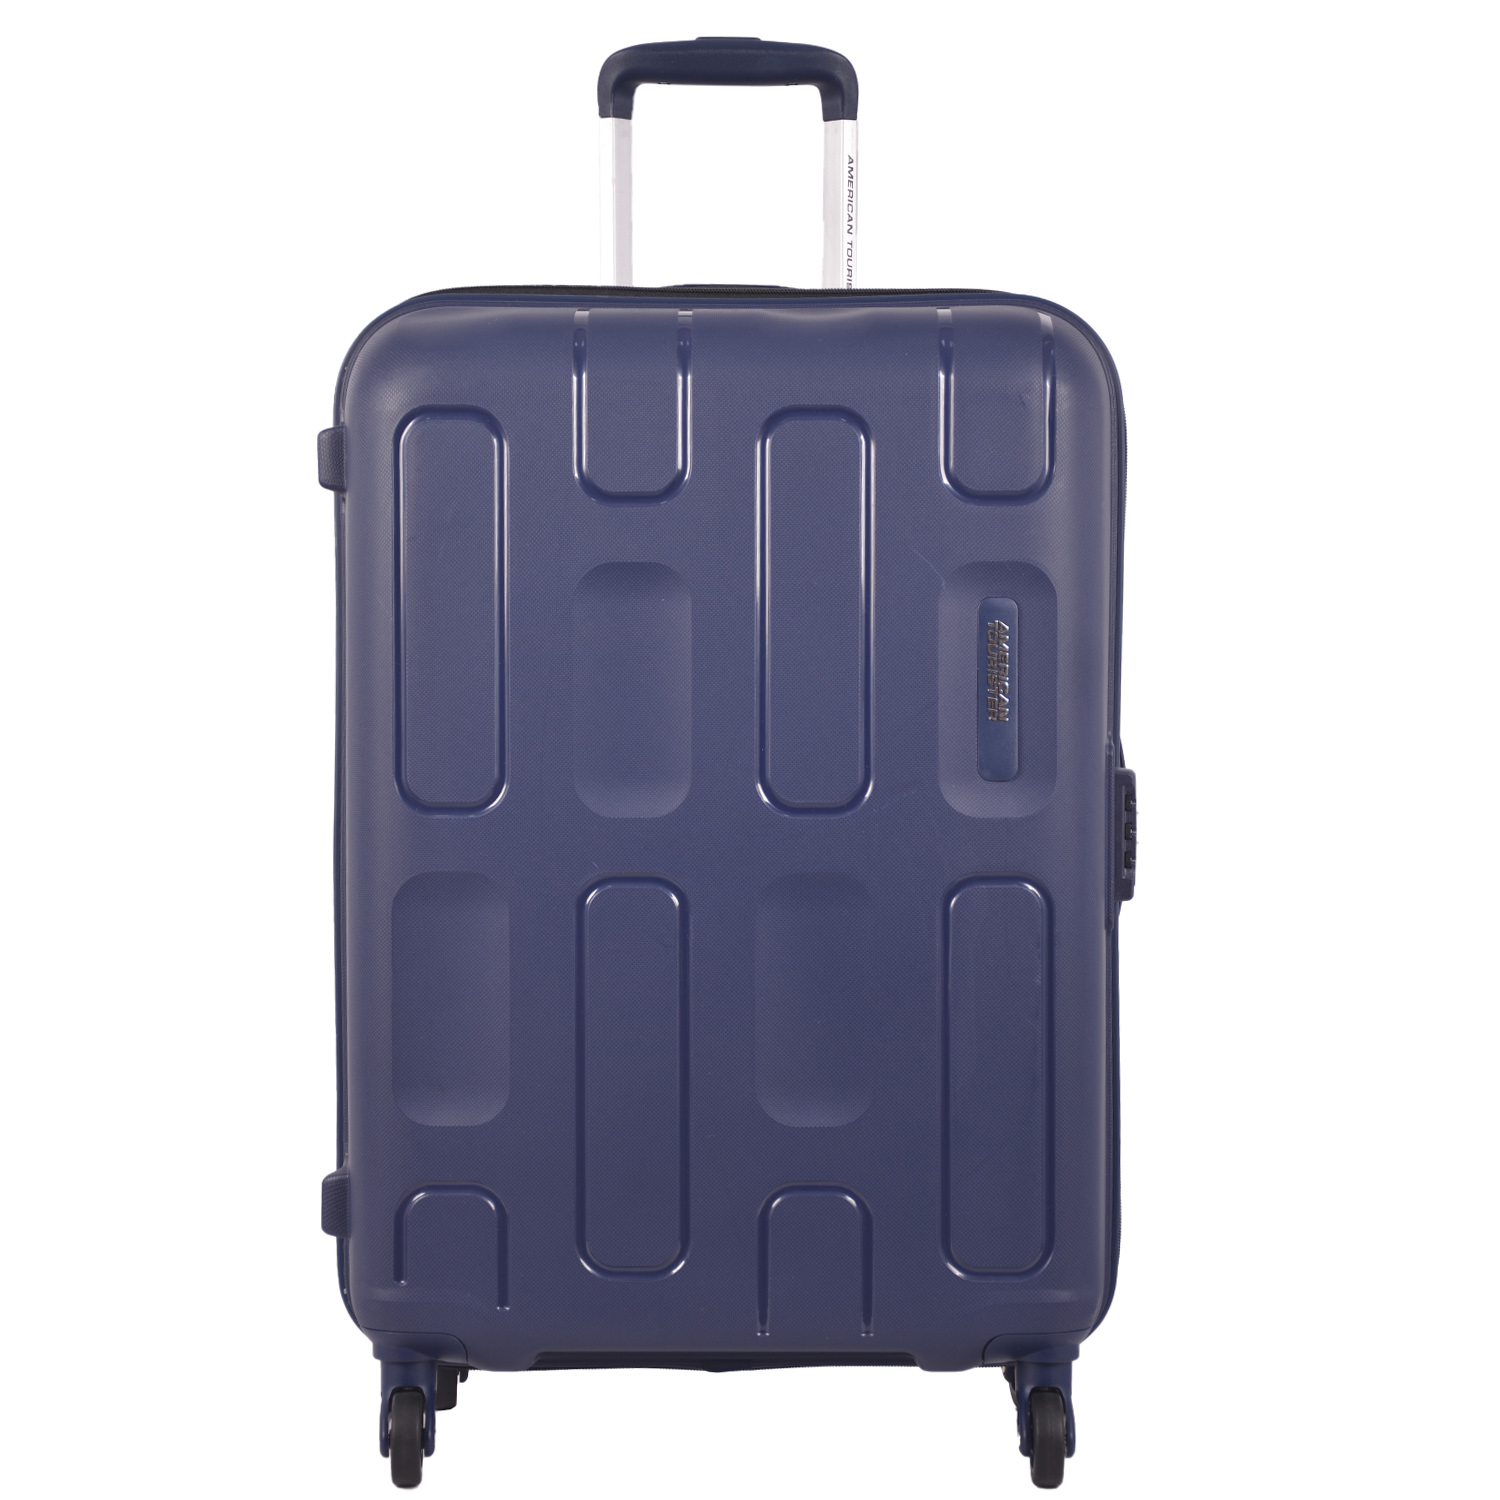 RoshanBags_AMERICAN TOURISTER ELLIPSO STROLLY NAVY